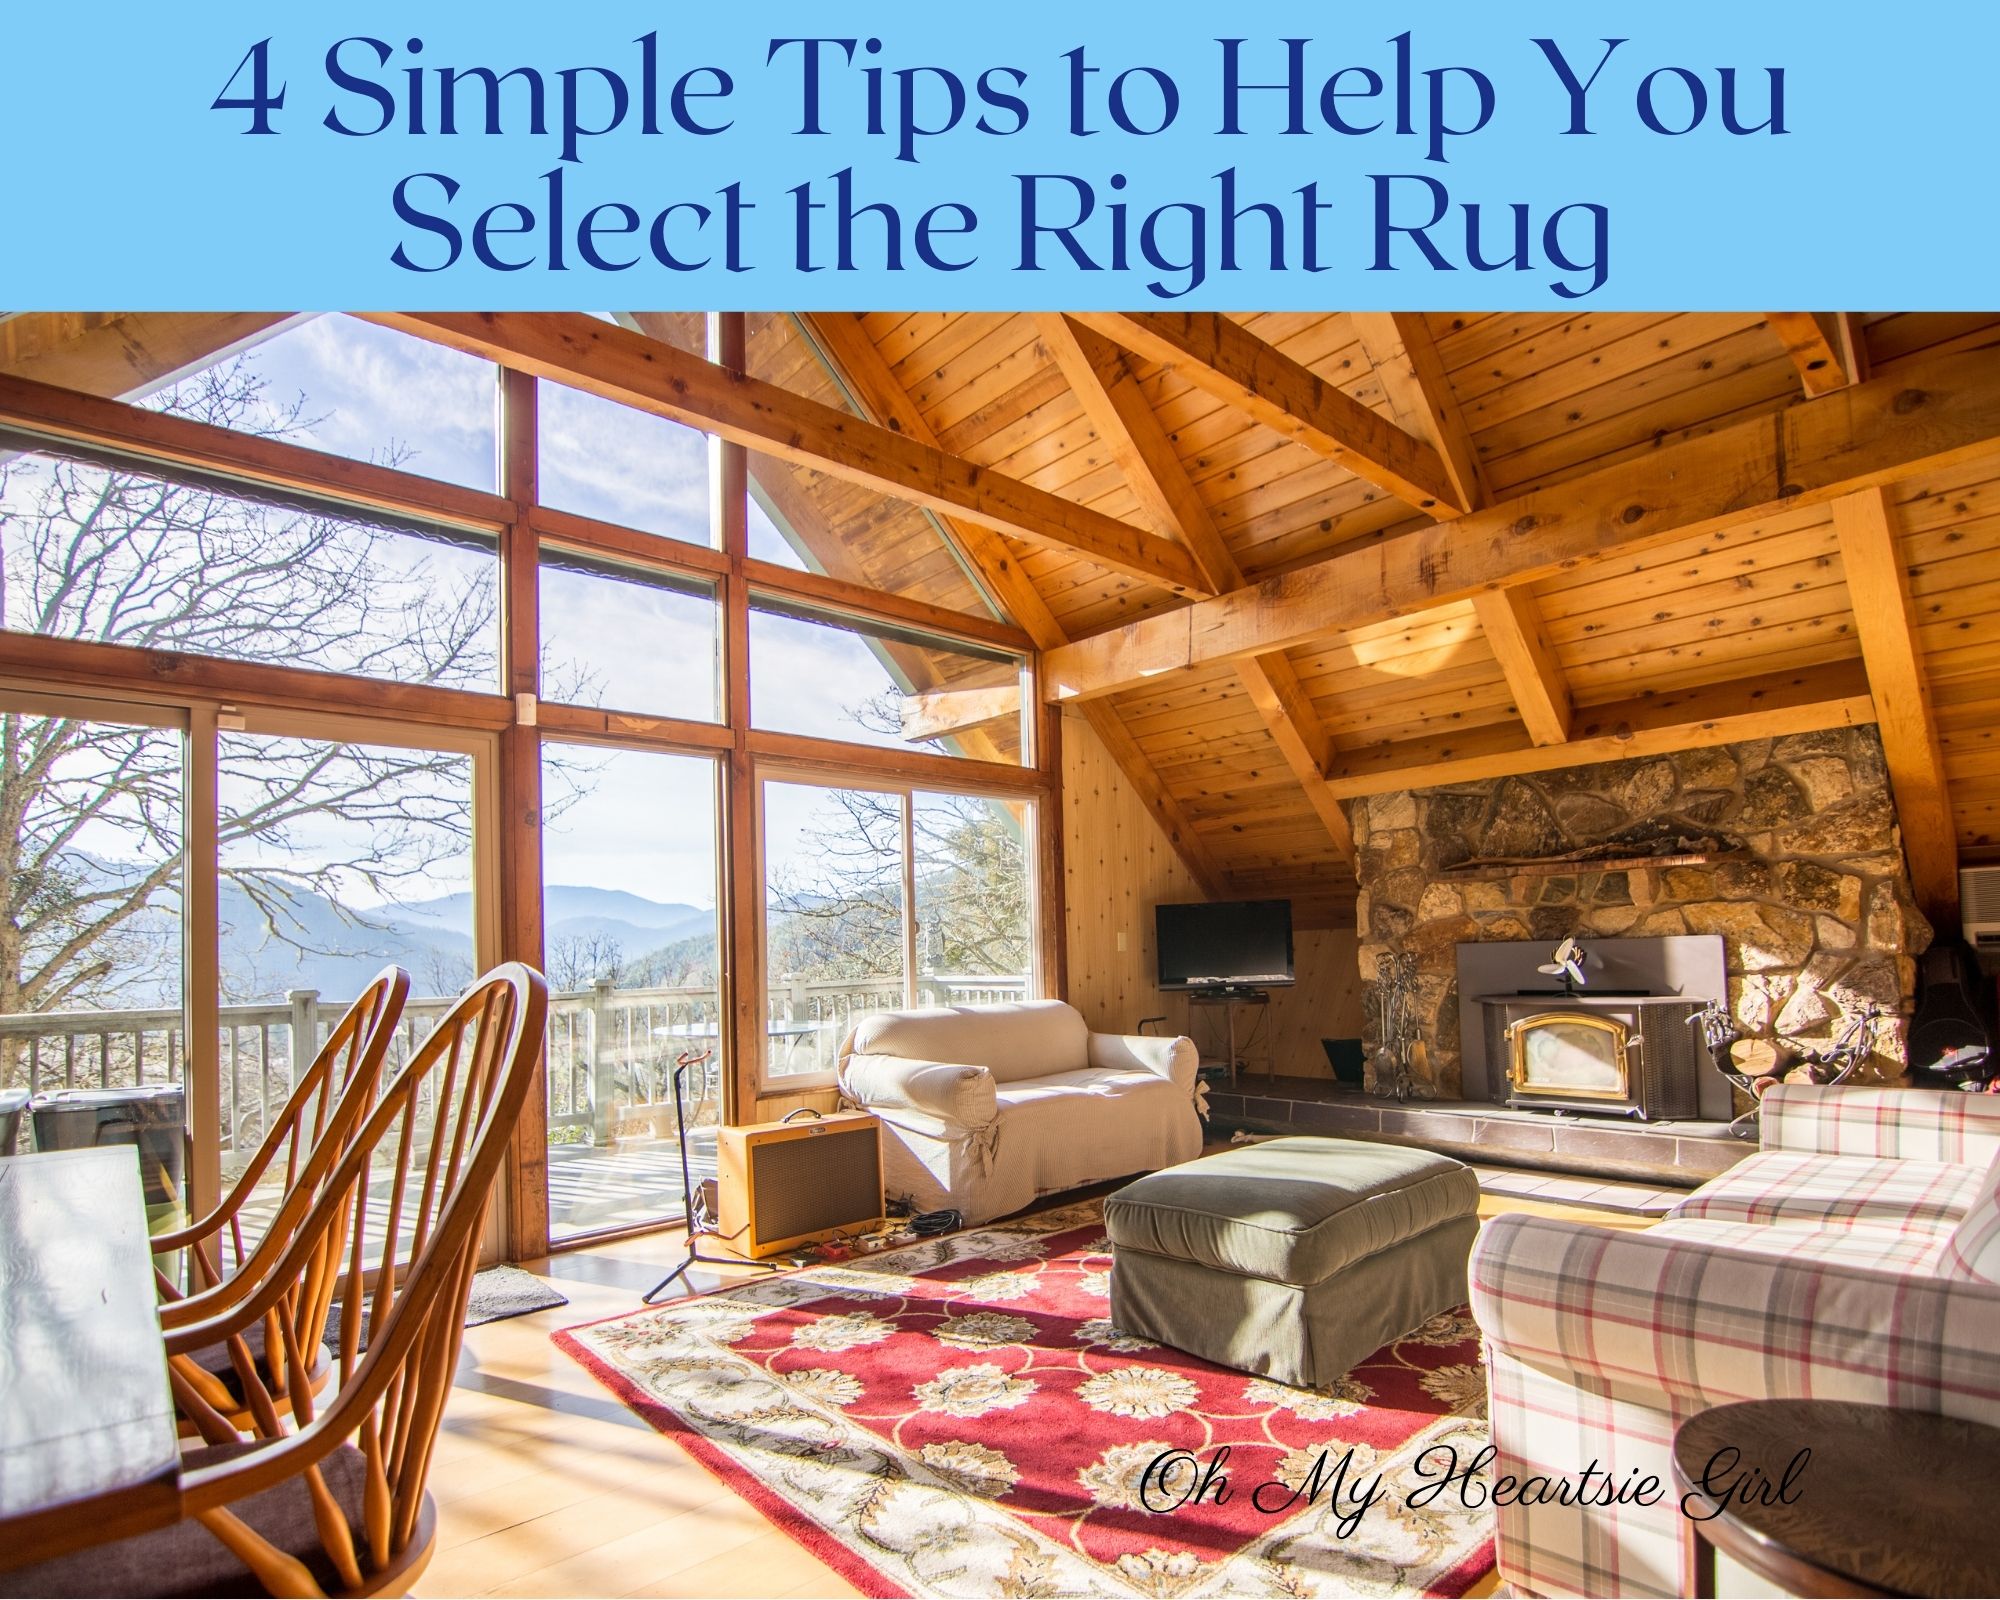 4-Simple-Tips-to-Help-You-Select-the-Right-Rug